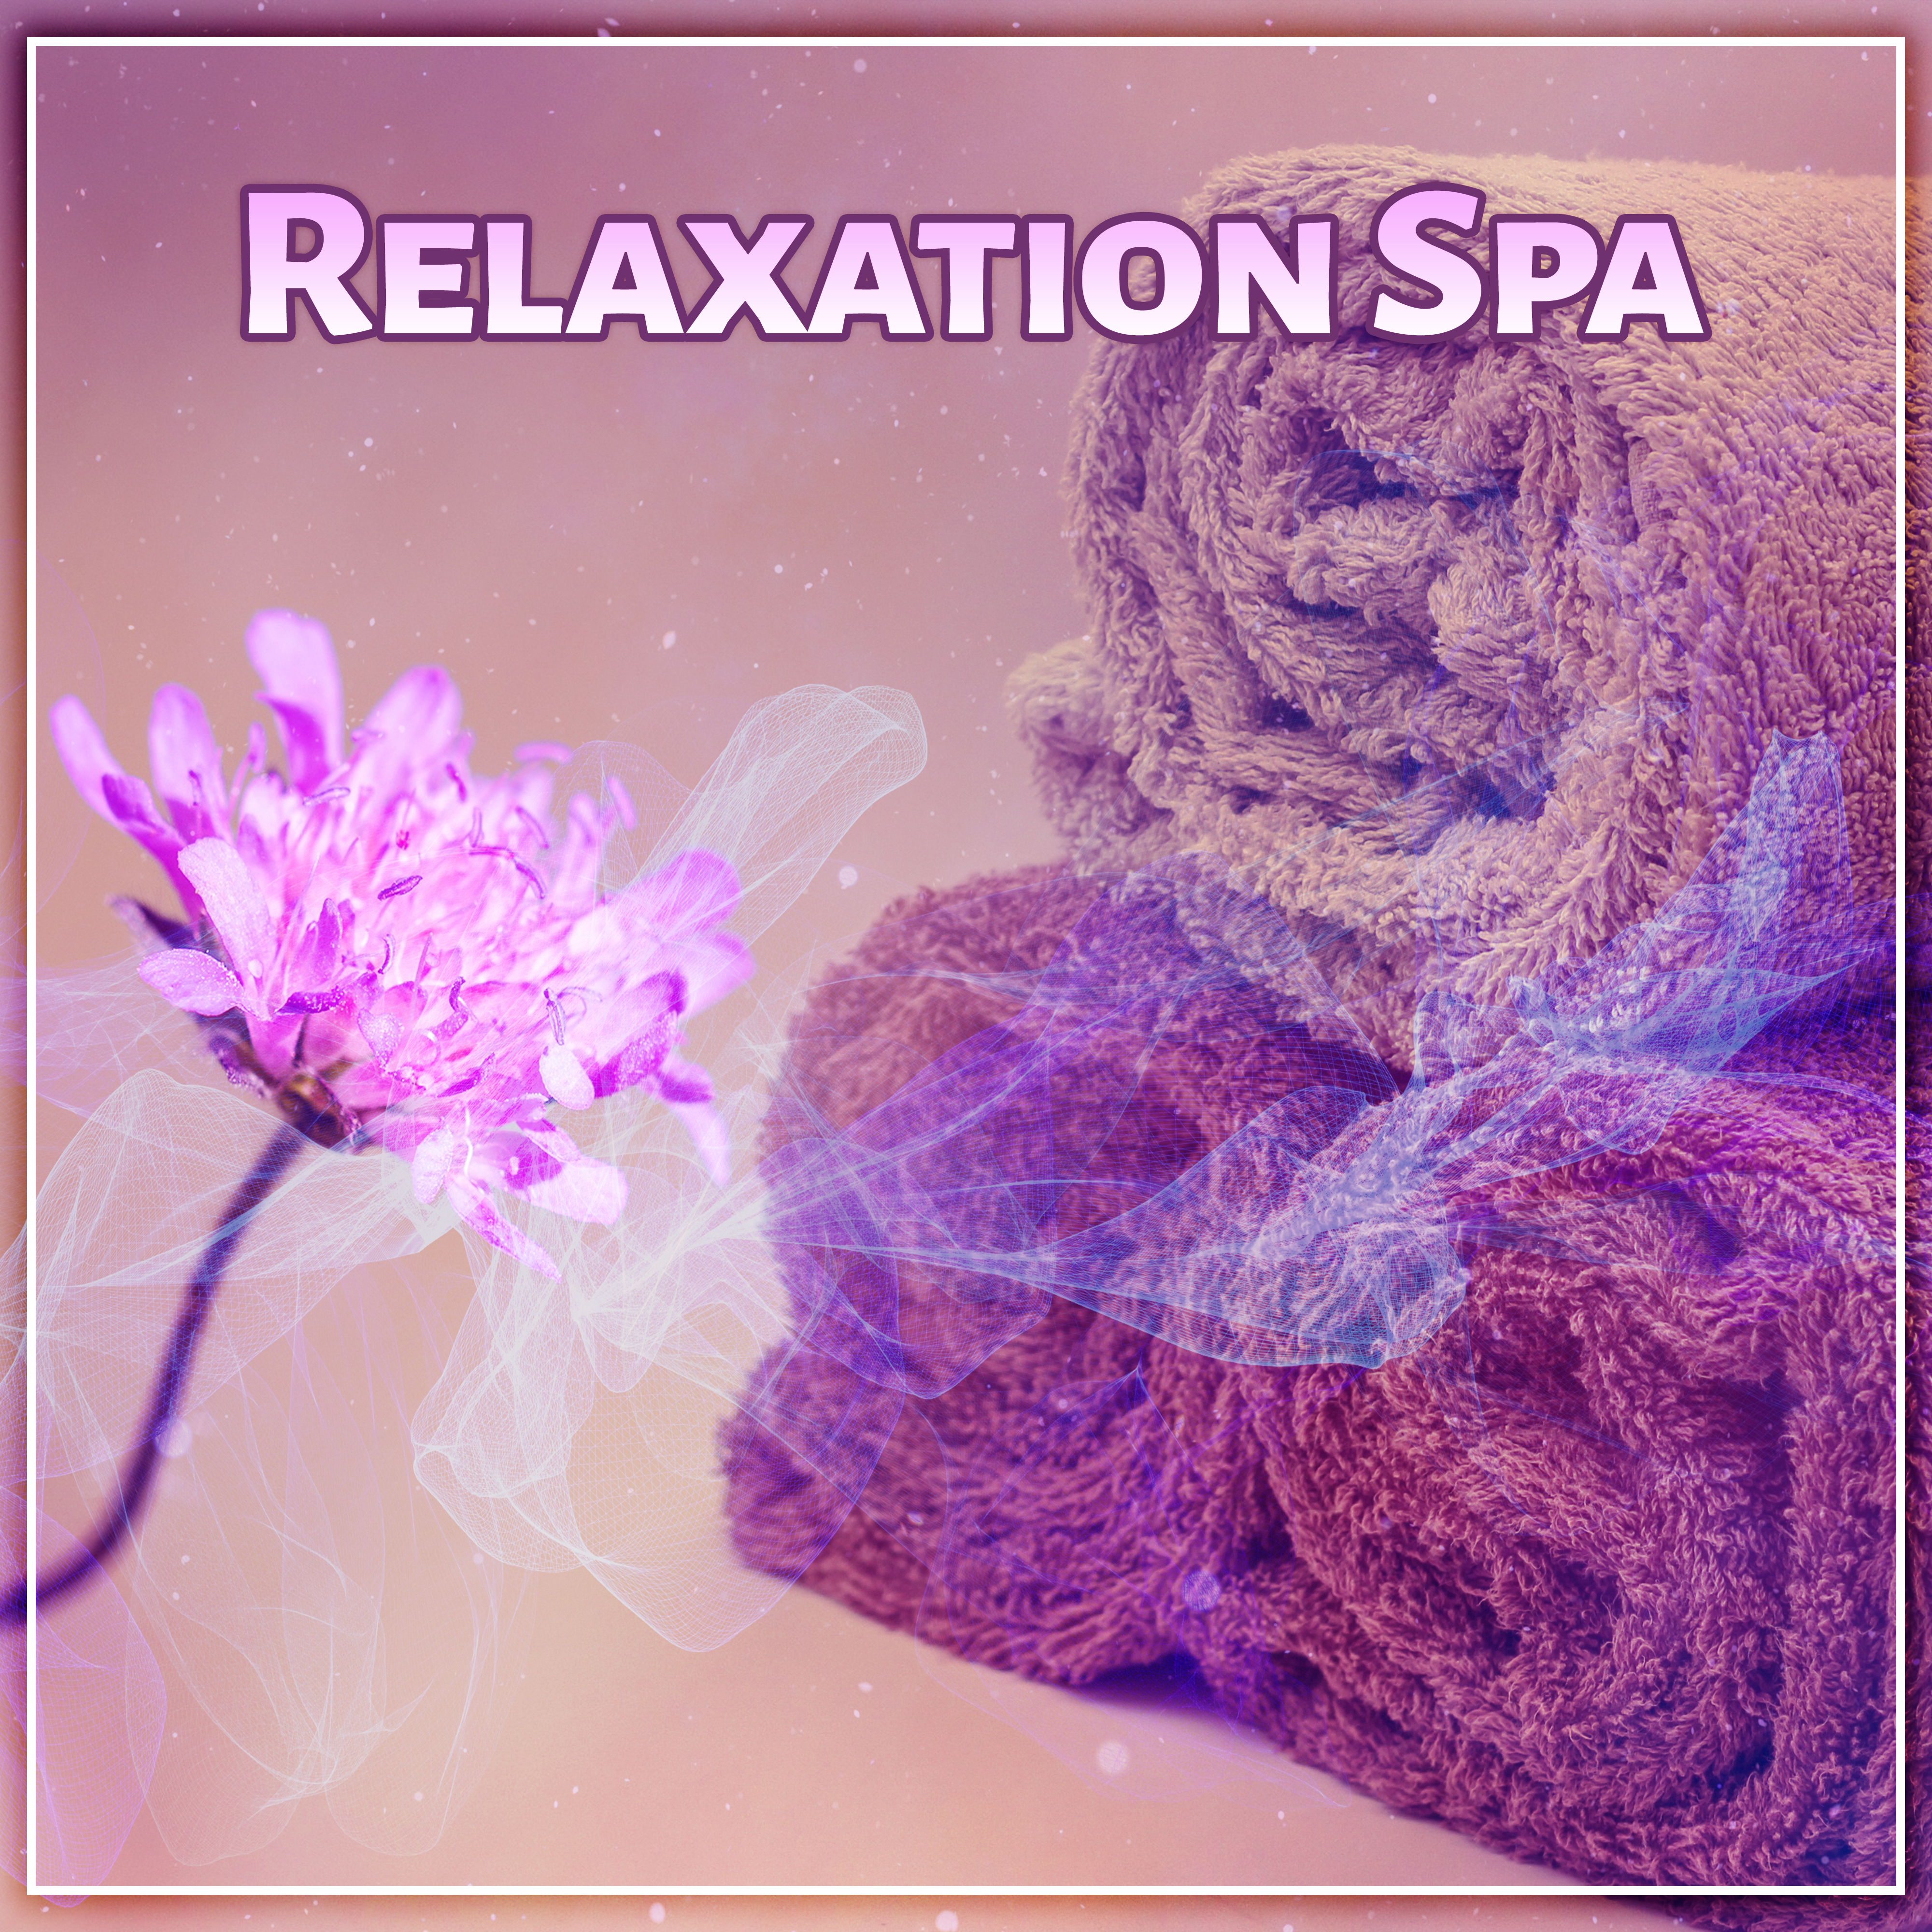 Relaxation Spa – Nature Sounds After Work, Deep Sleep, Peaceful Mind, Meditation Spa, Sounds of Birds, Fresh Air